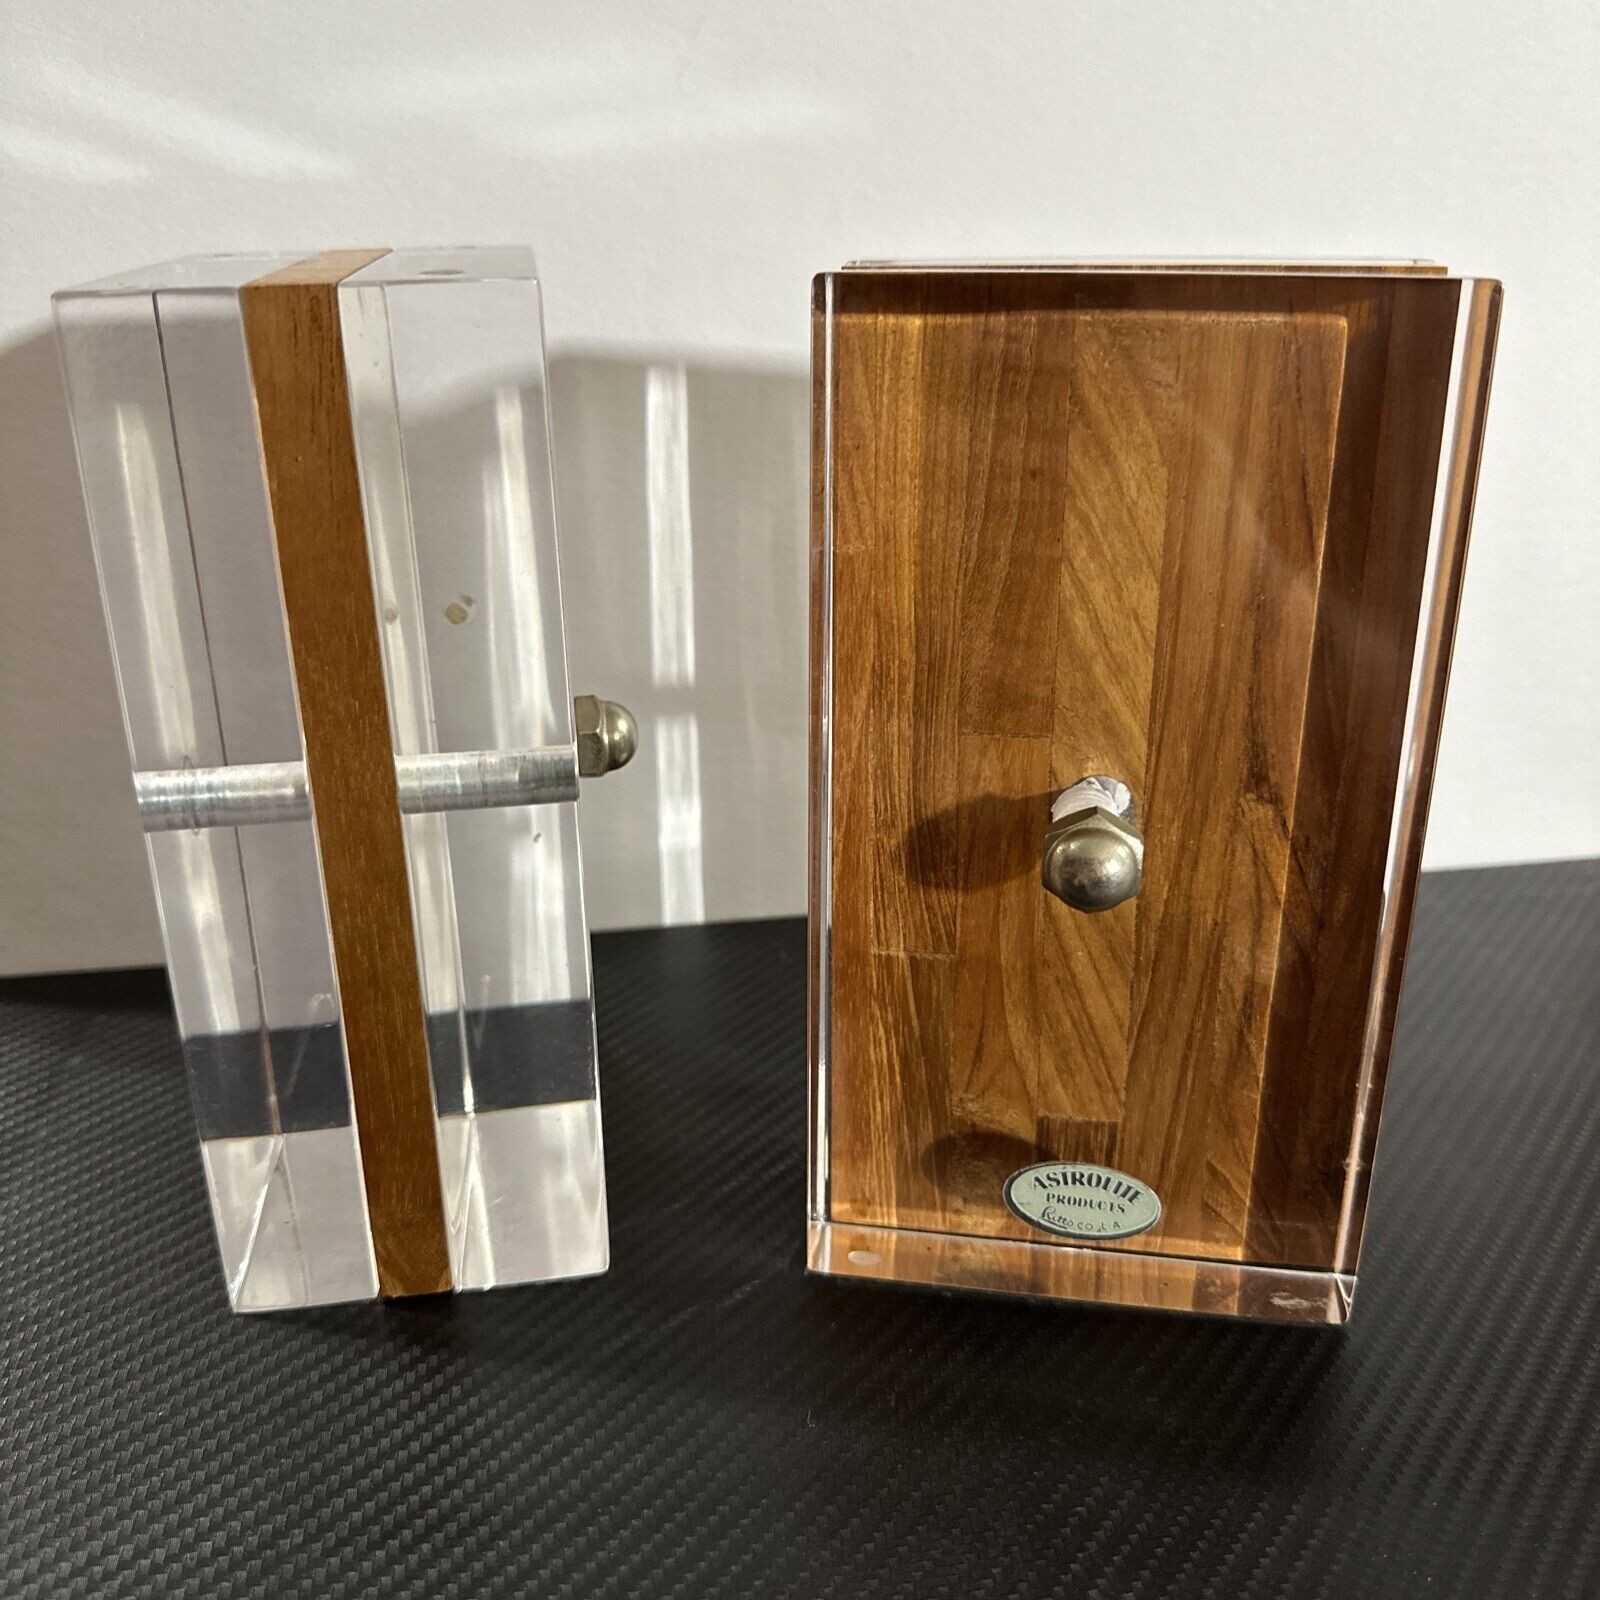 RARE 1960’s MCM Ritts Astrolite Lucite, Metal & Wood Desk Accessories Book Ends